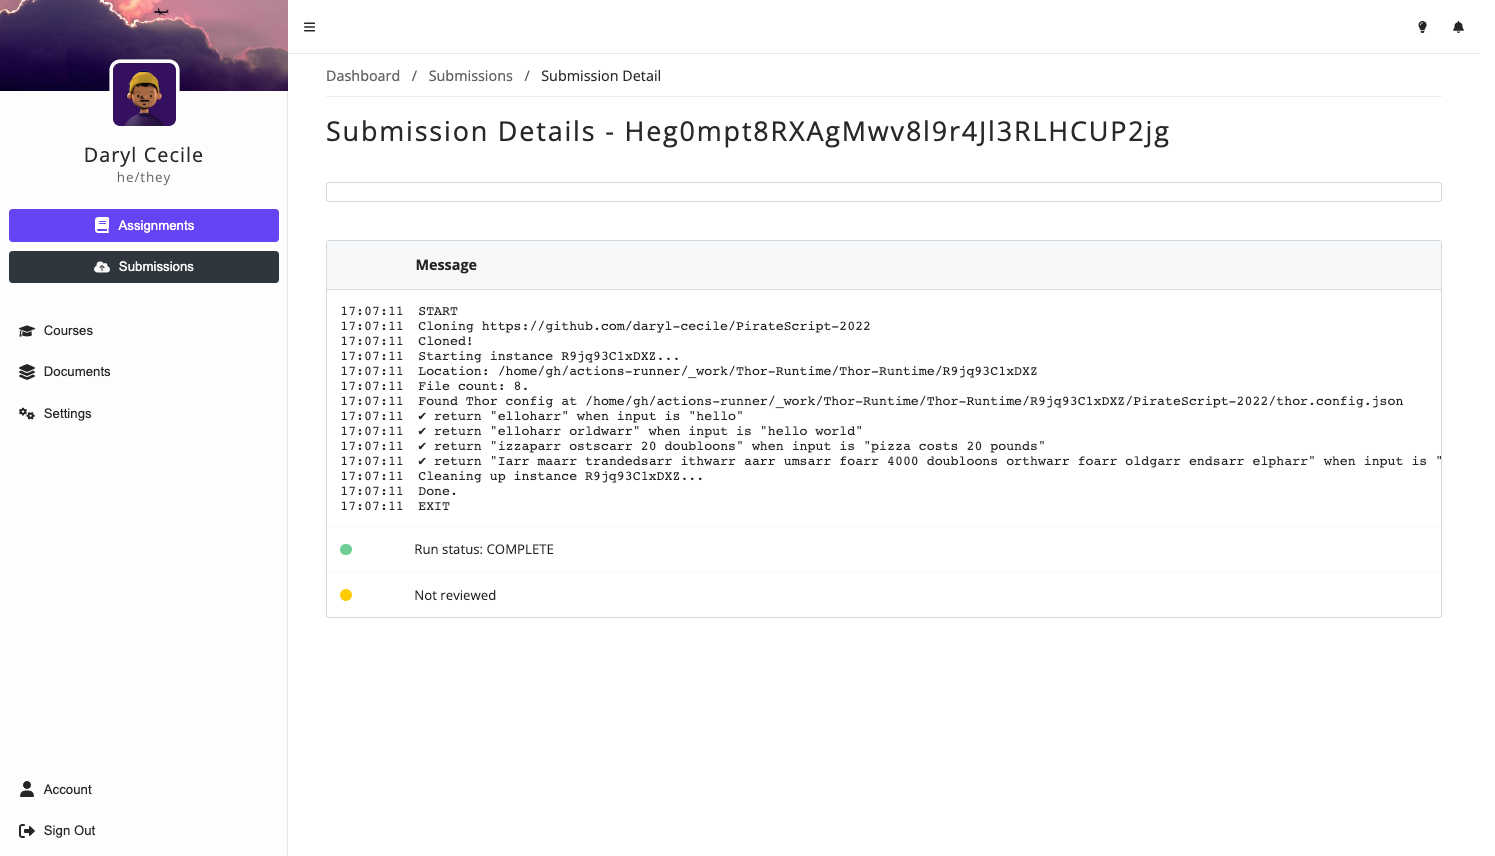 Submission detail page showing automatic testing results